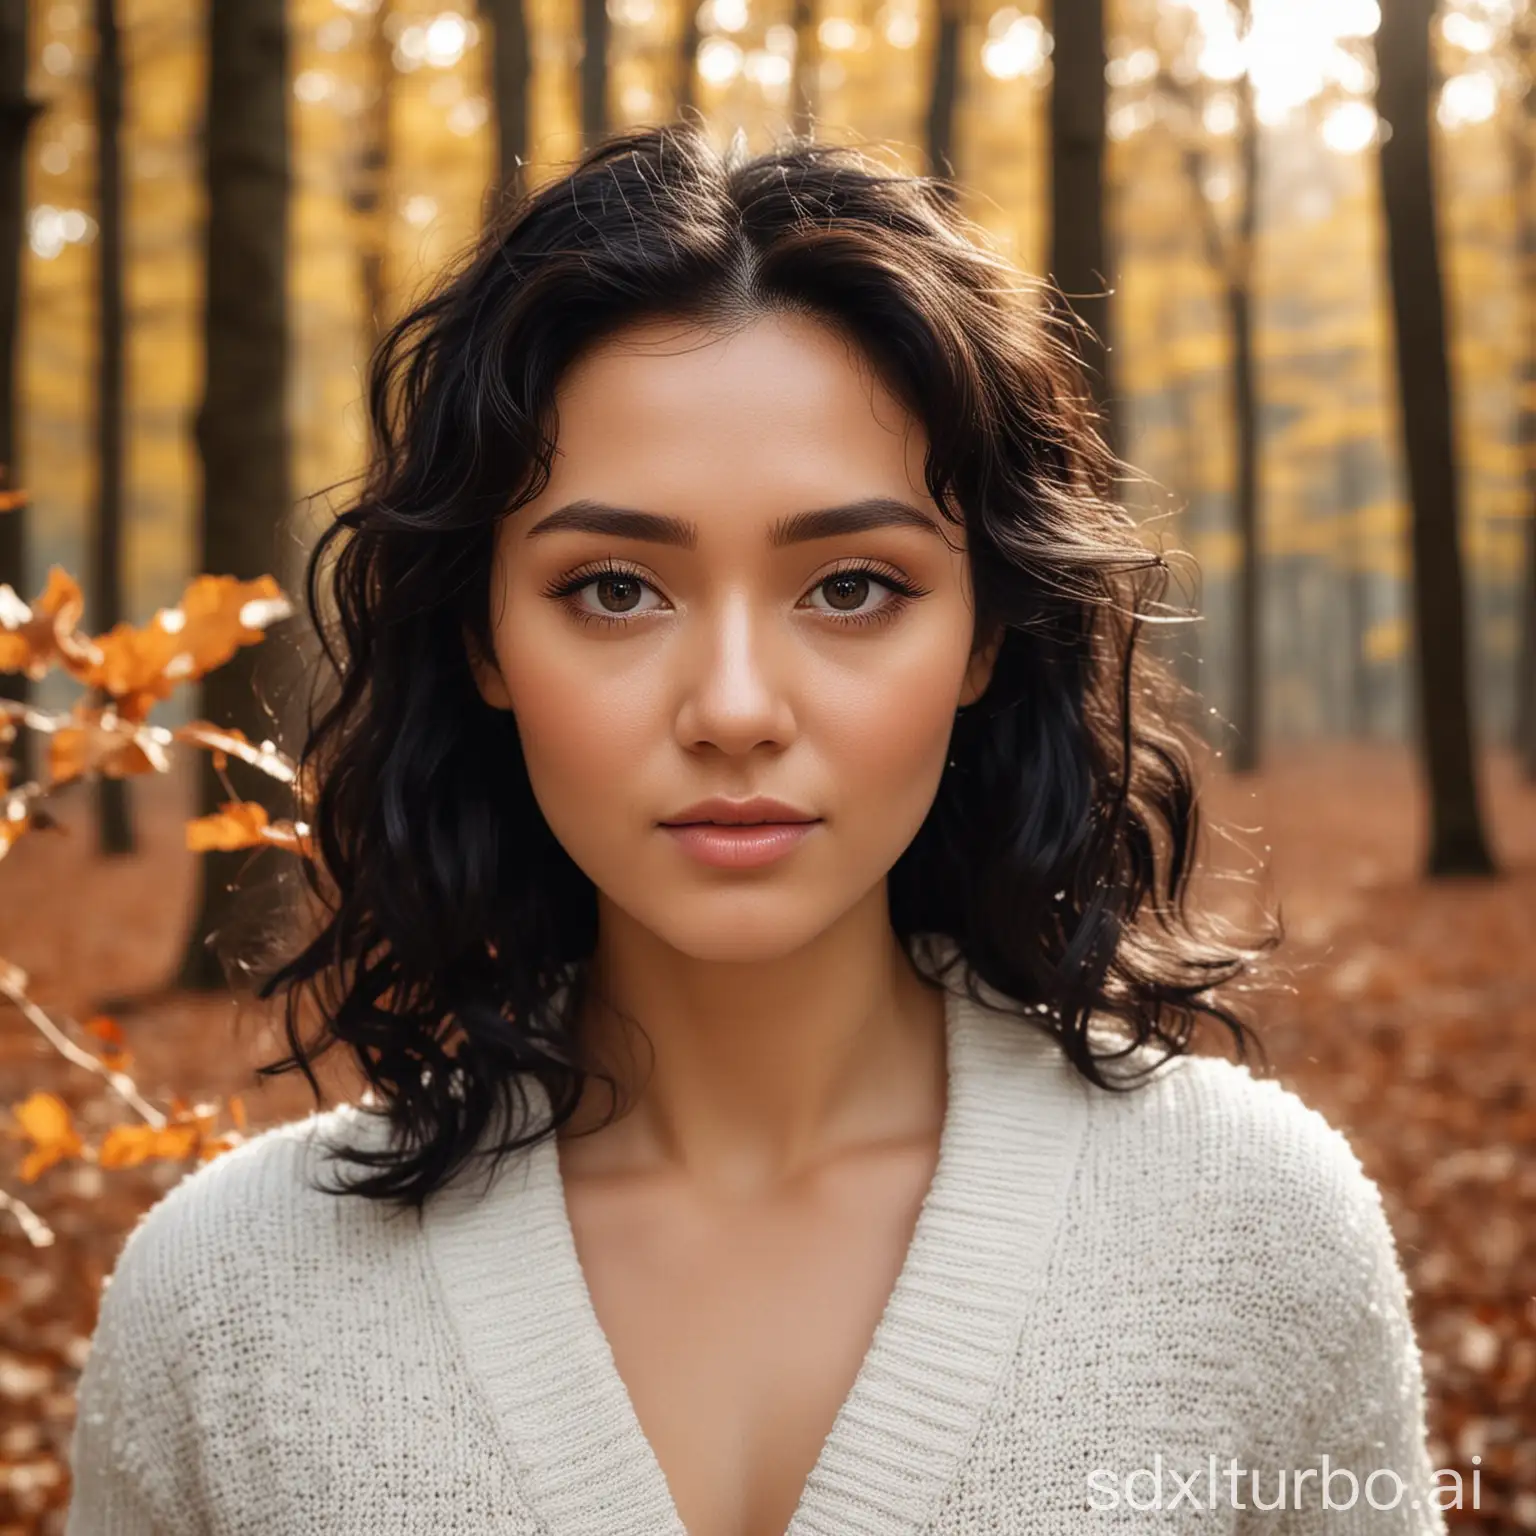 Serene-Woman-in-White-Knitted-Cardigan-Amidst-Autumn-Woods